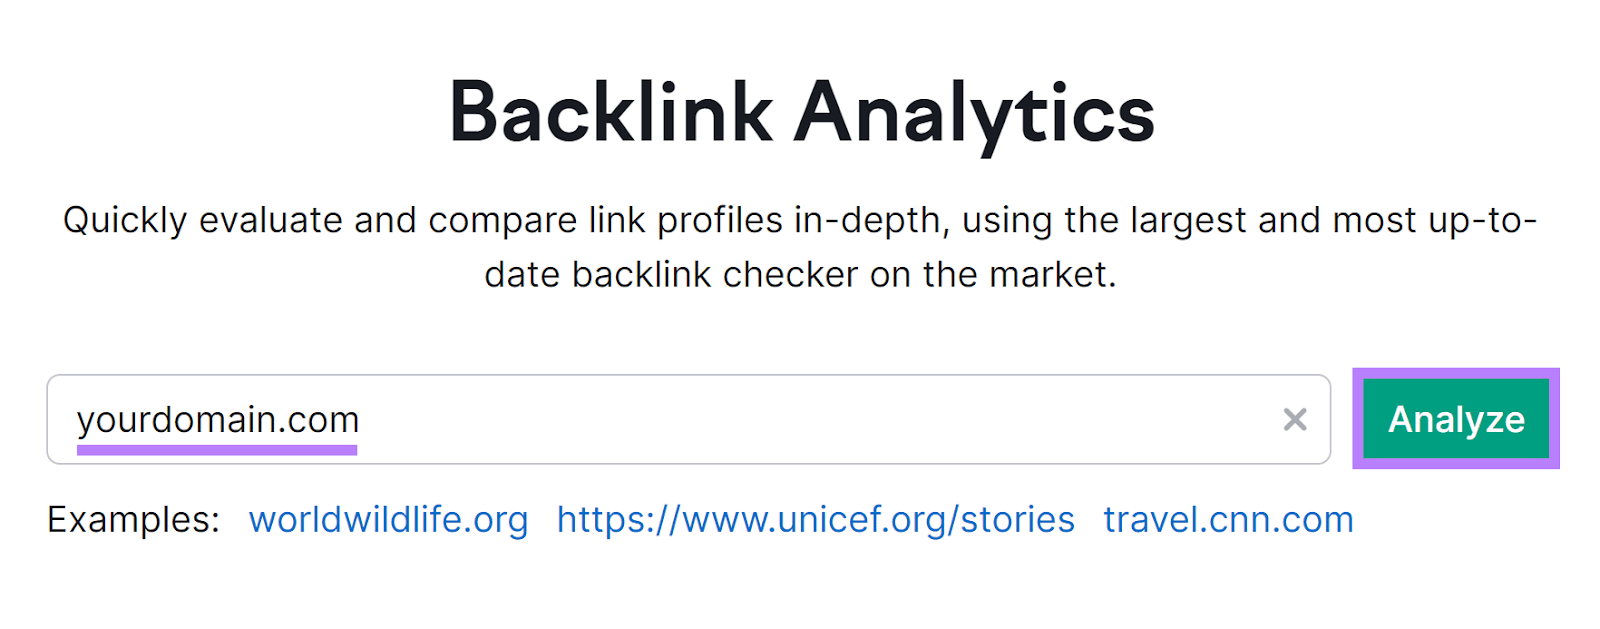 Semrush backlink analytics tool start with 'yourdomain.com' in input field and 'Analyze' button highlighted.